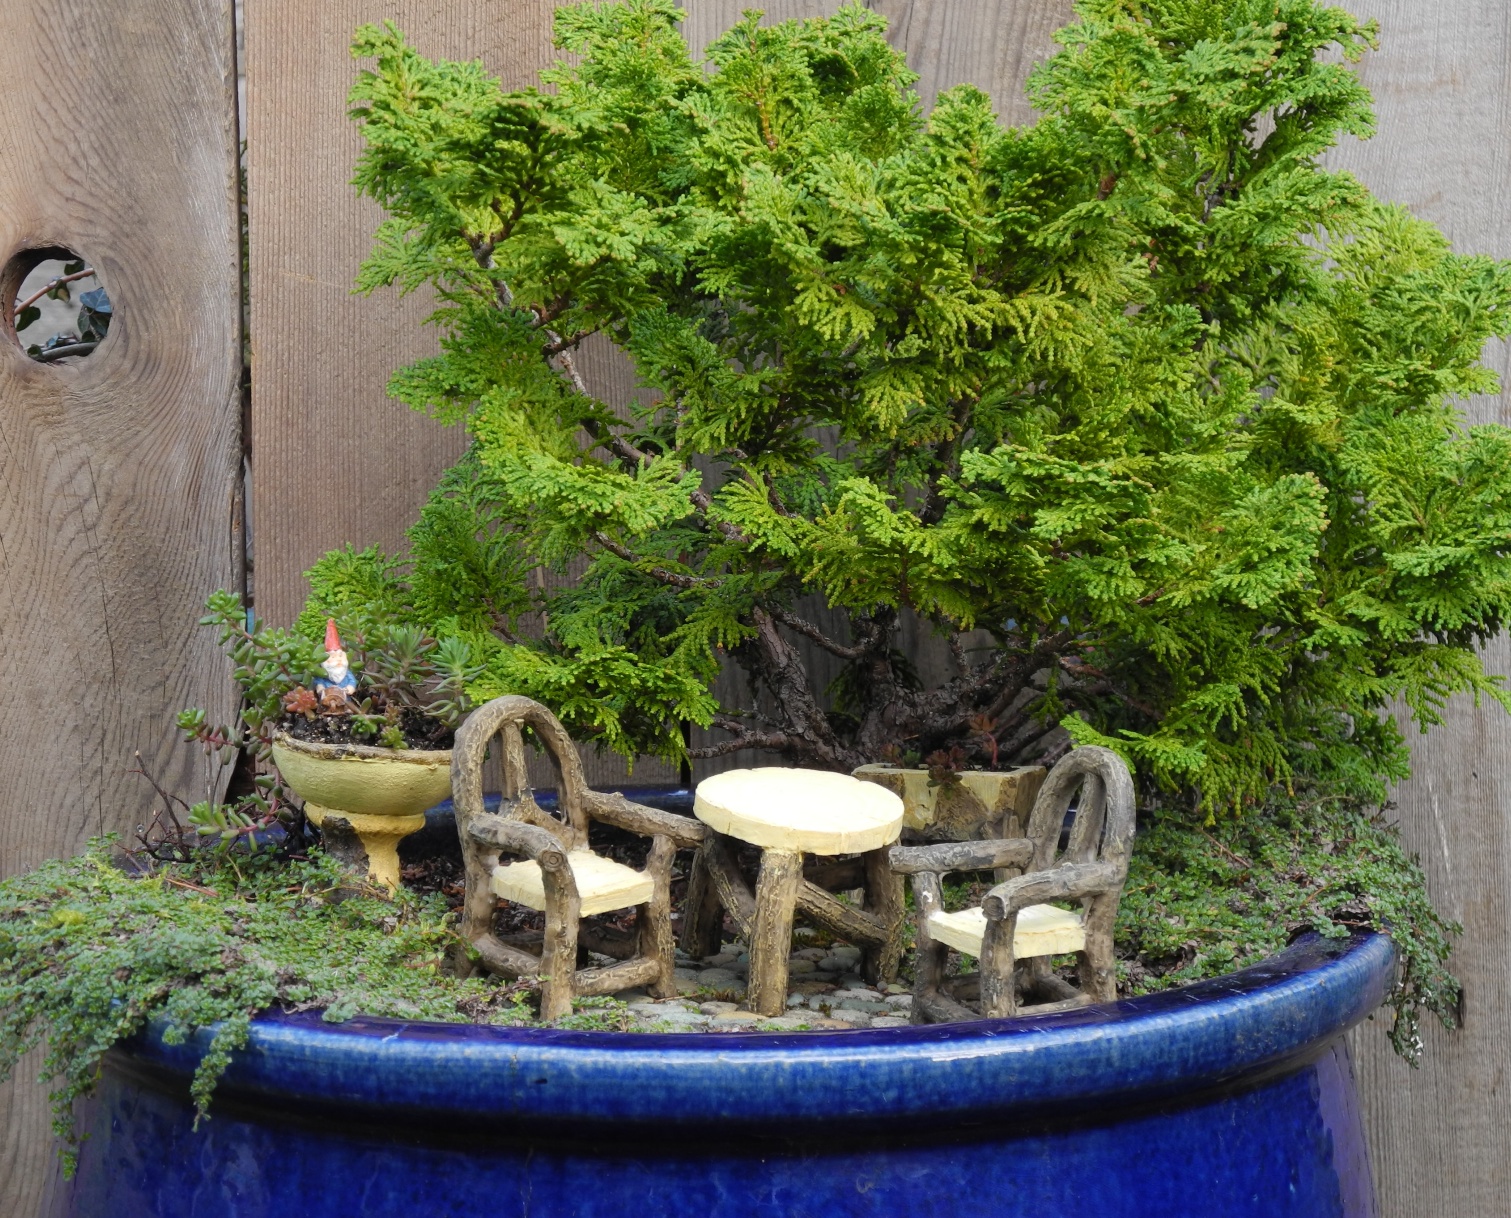 shrub inside a large, dark blue planting pot, containing small green plants, tiny table and two chairs, painted to look like wood, succulent fairy garden, little dish with succulents and a gnome figurine